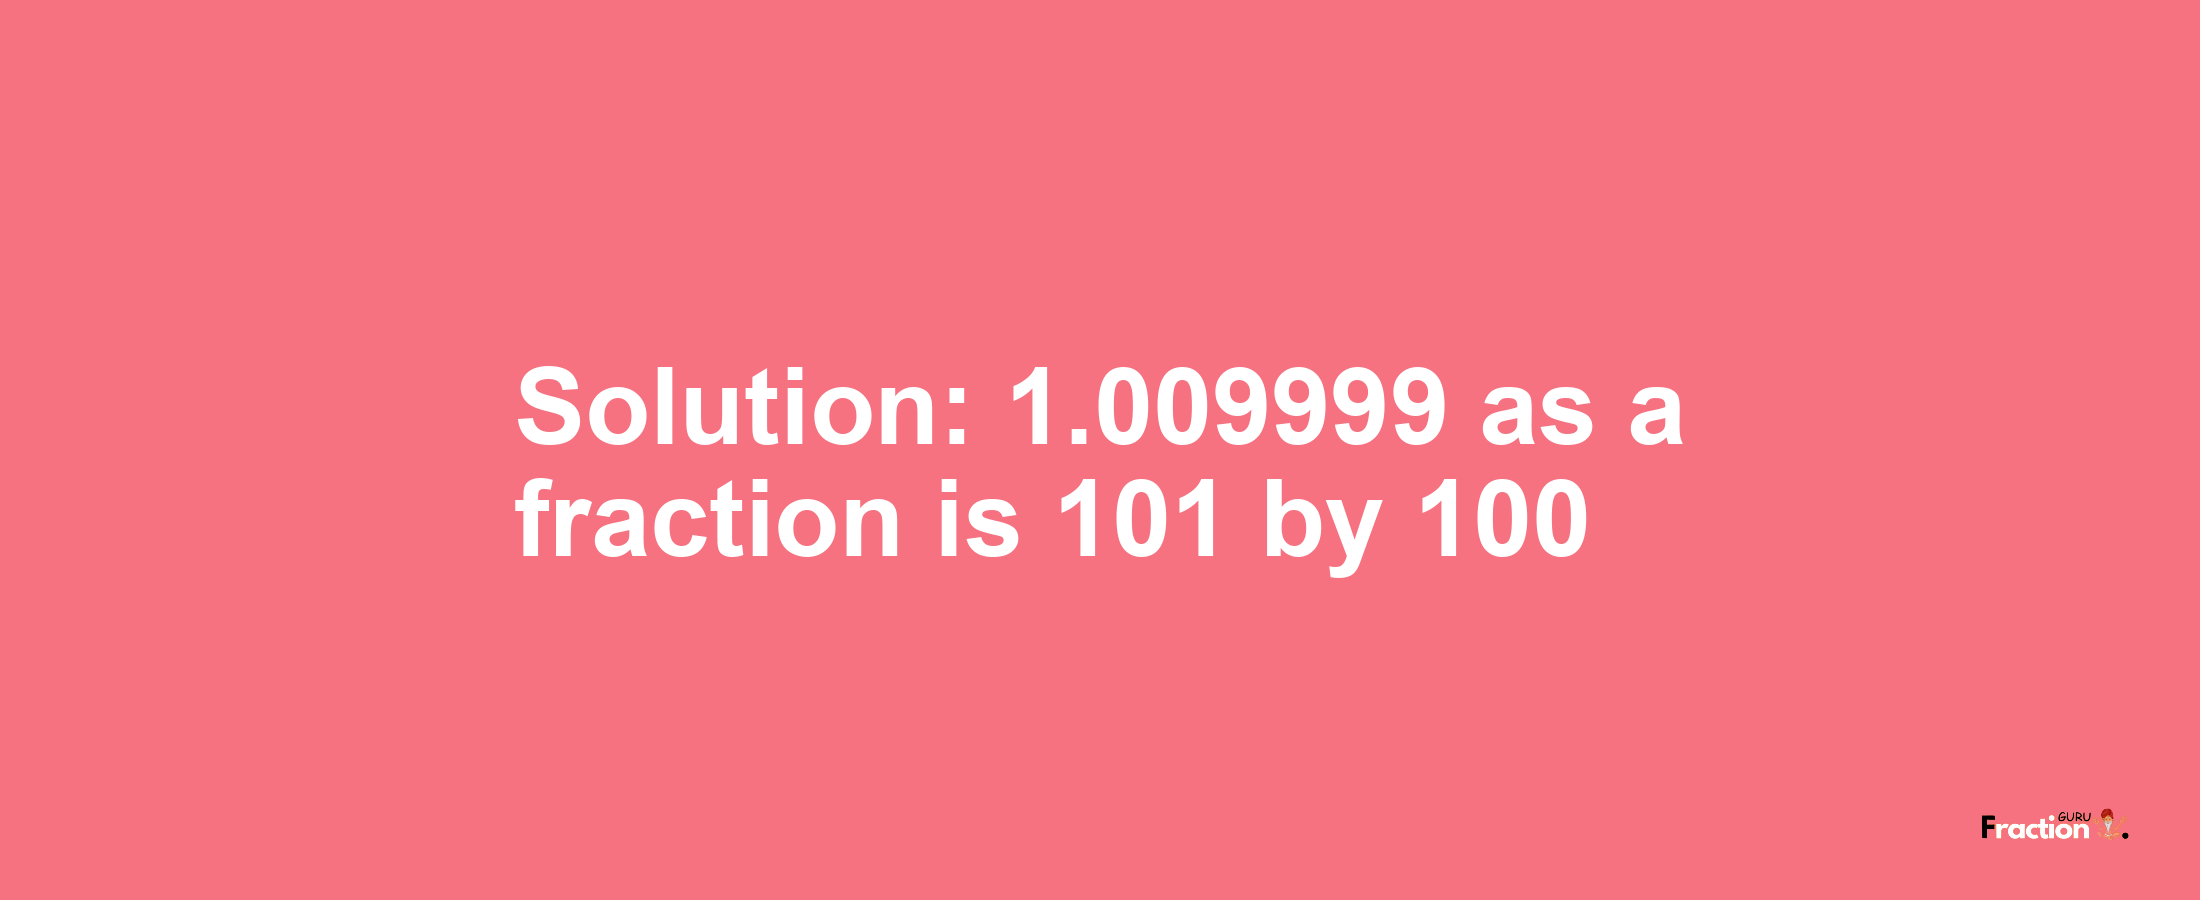 Solution:1.009999 as a fraction is 101/100